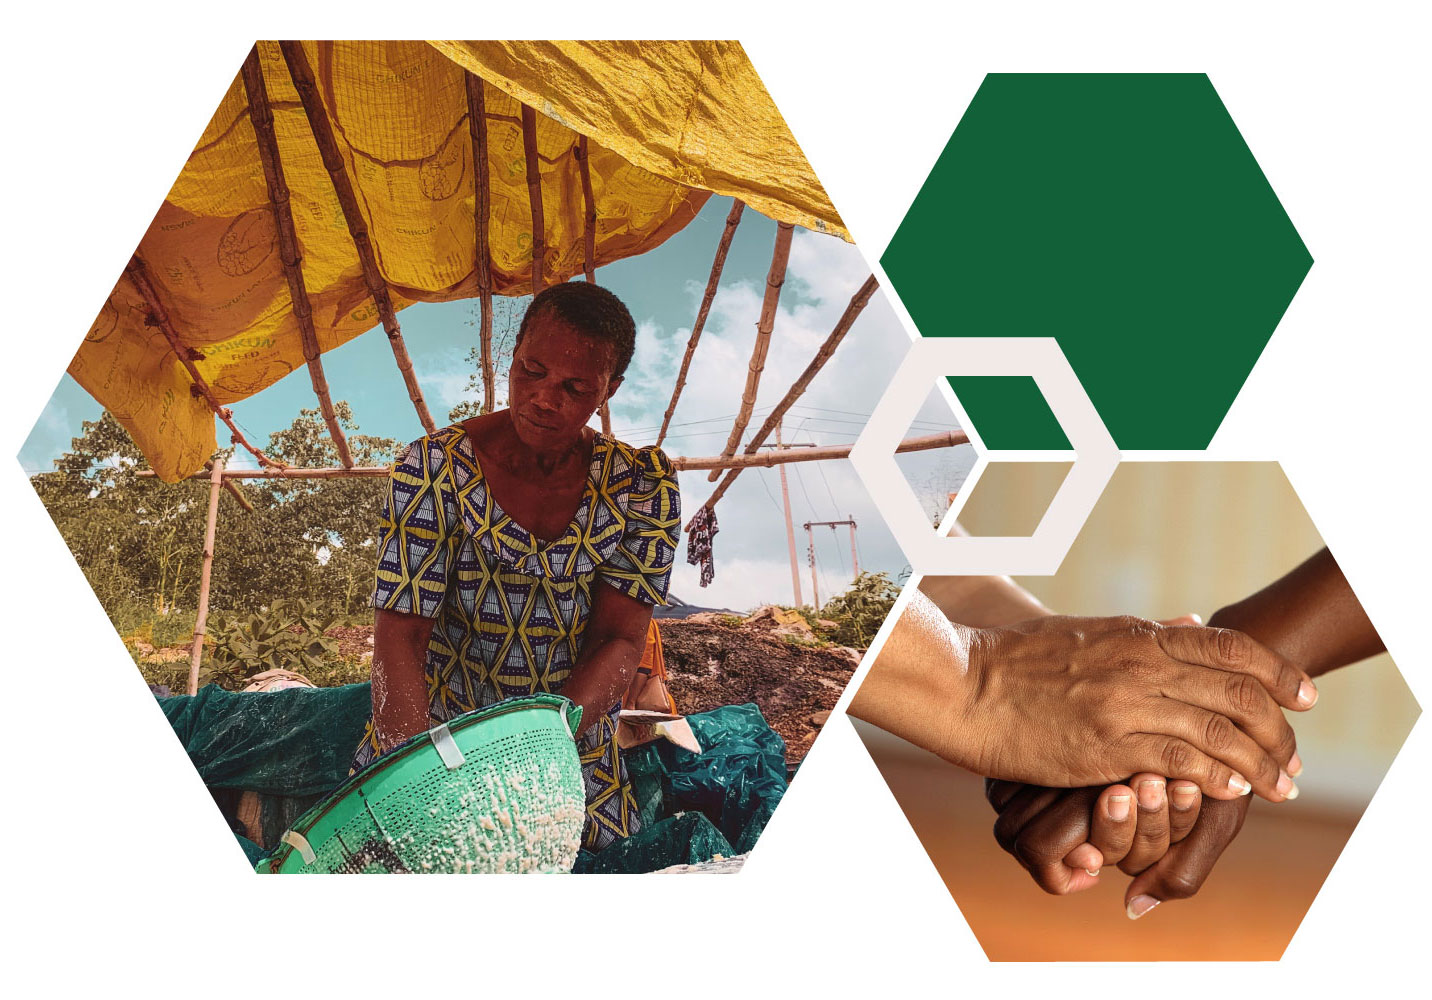 Hexagon collage with an image of a Nigerian woman working outside and an image of clasped hands of two people.